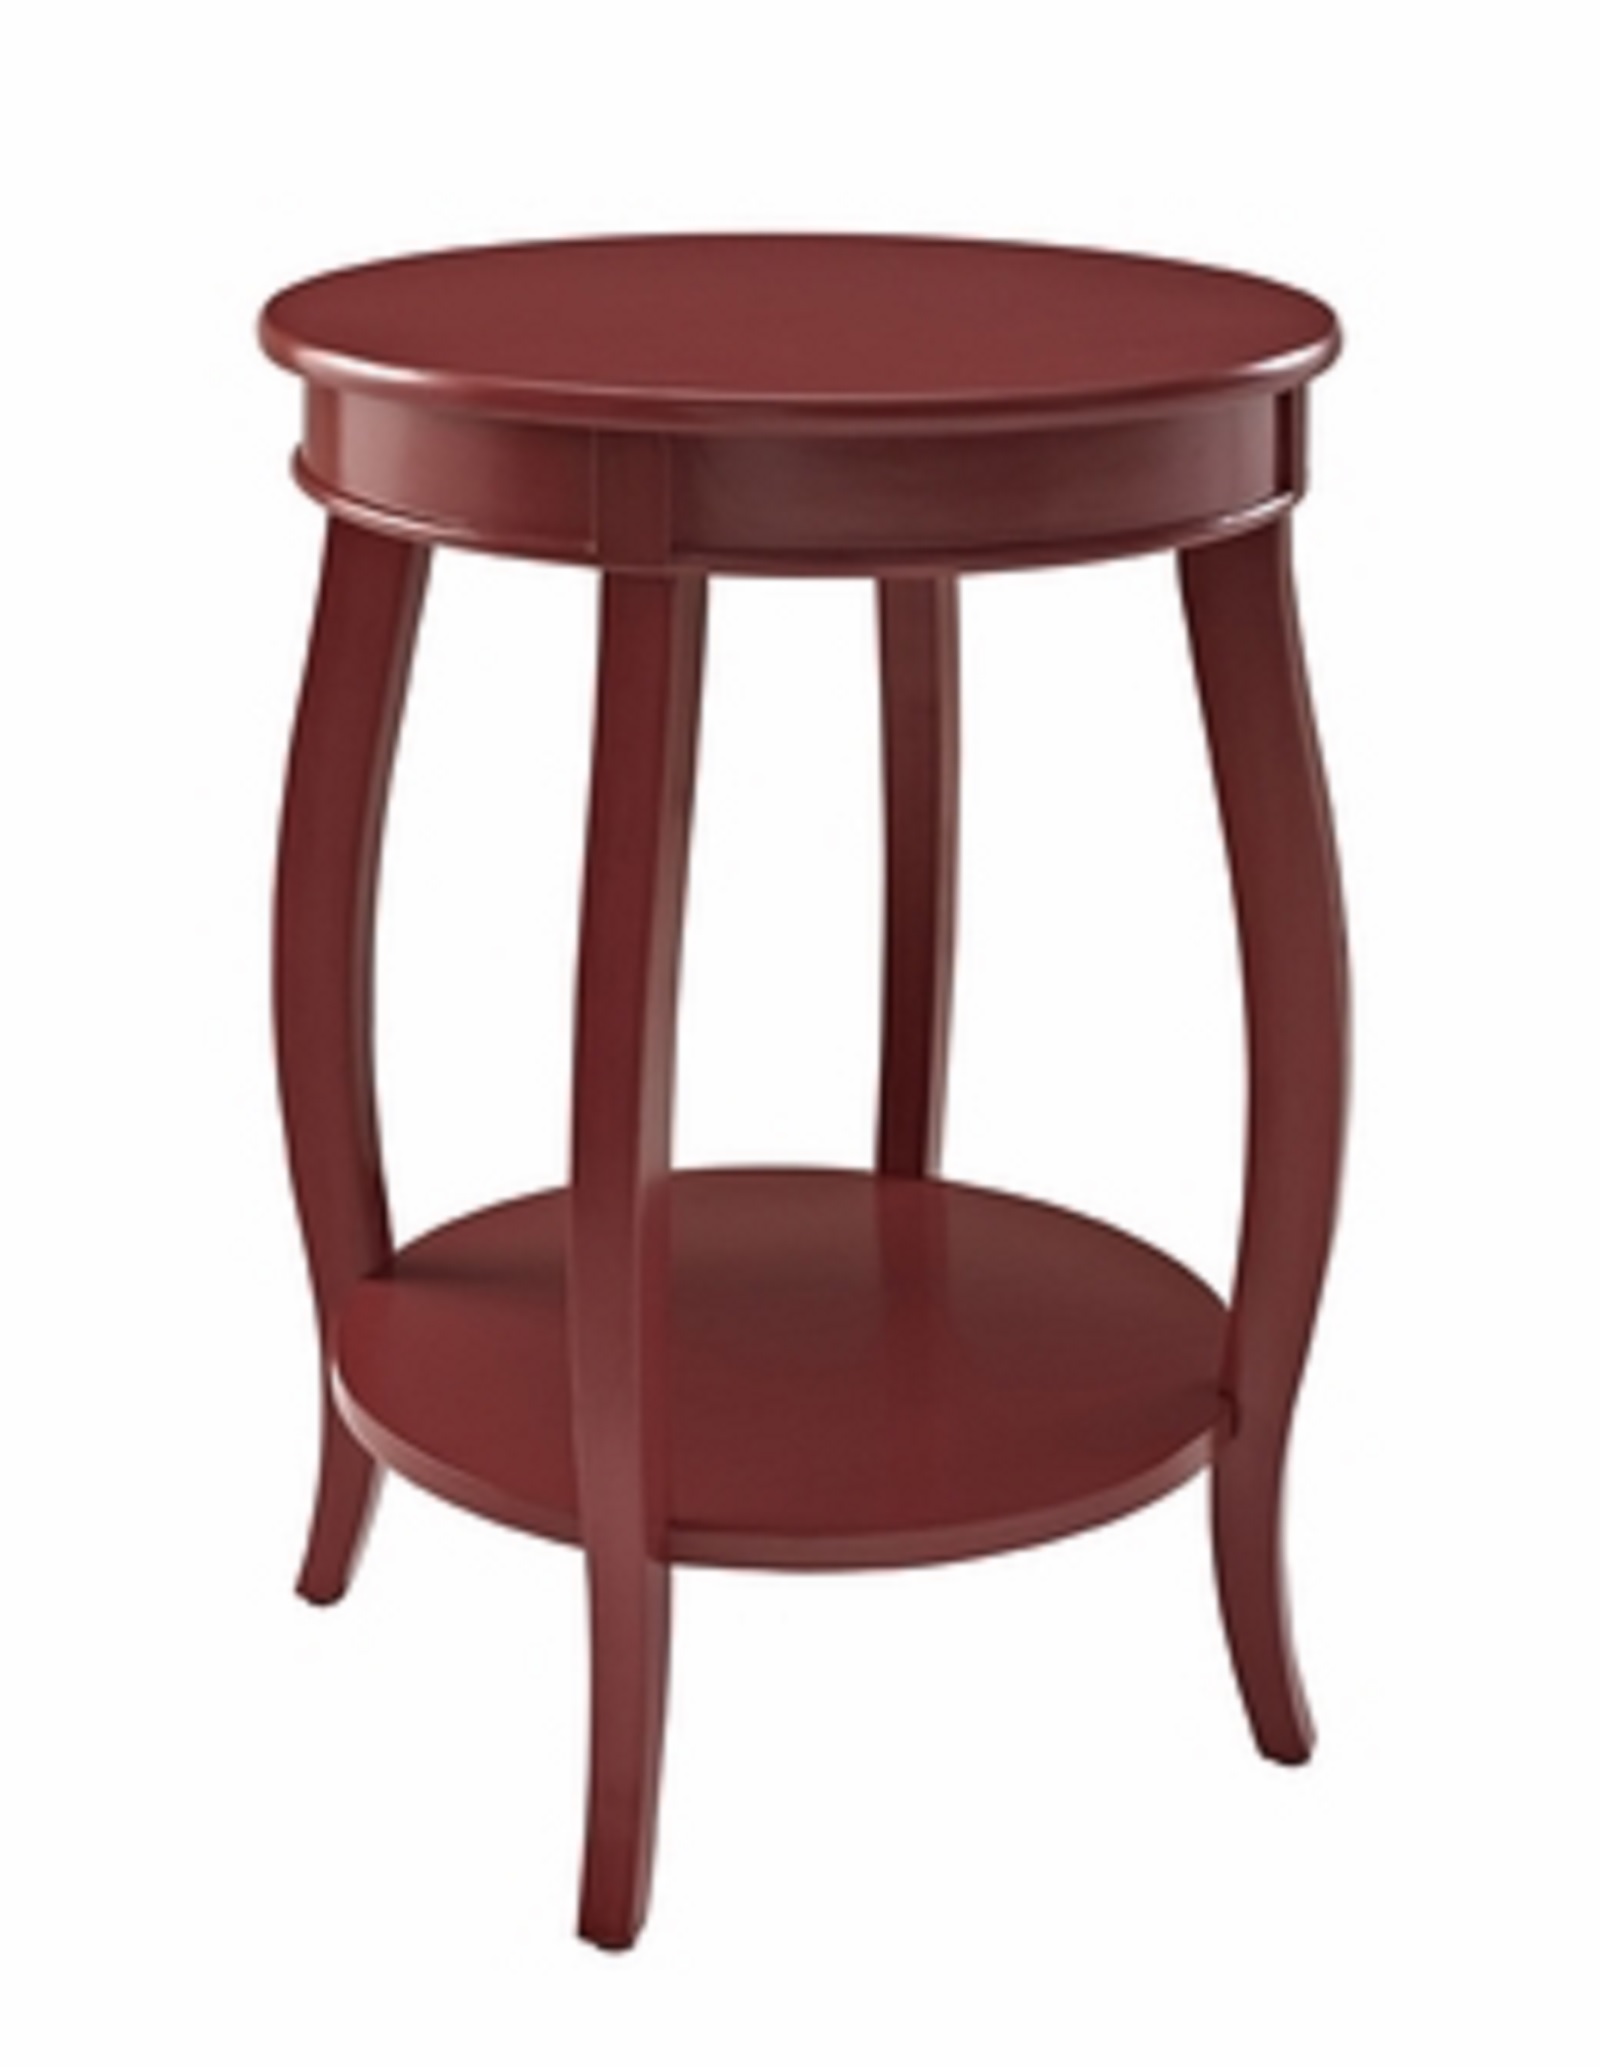 L Powell Red Round Table with Shelf